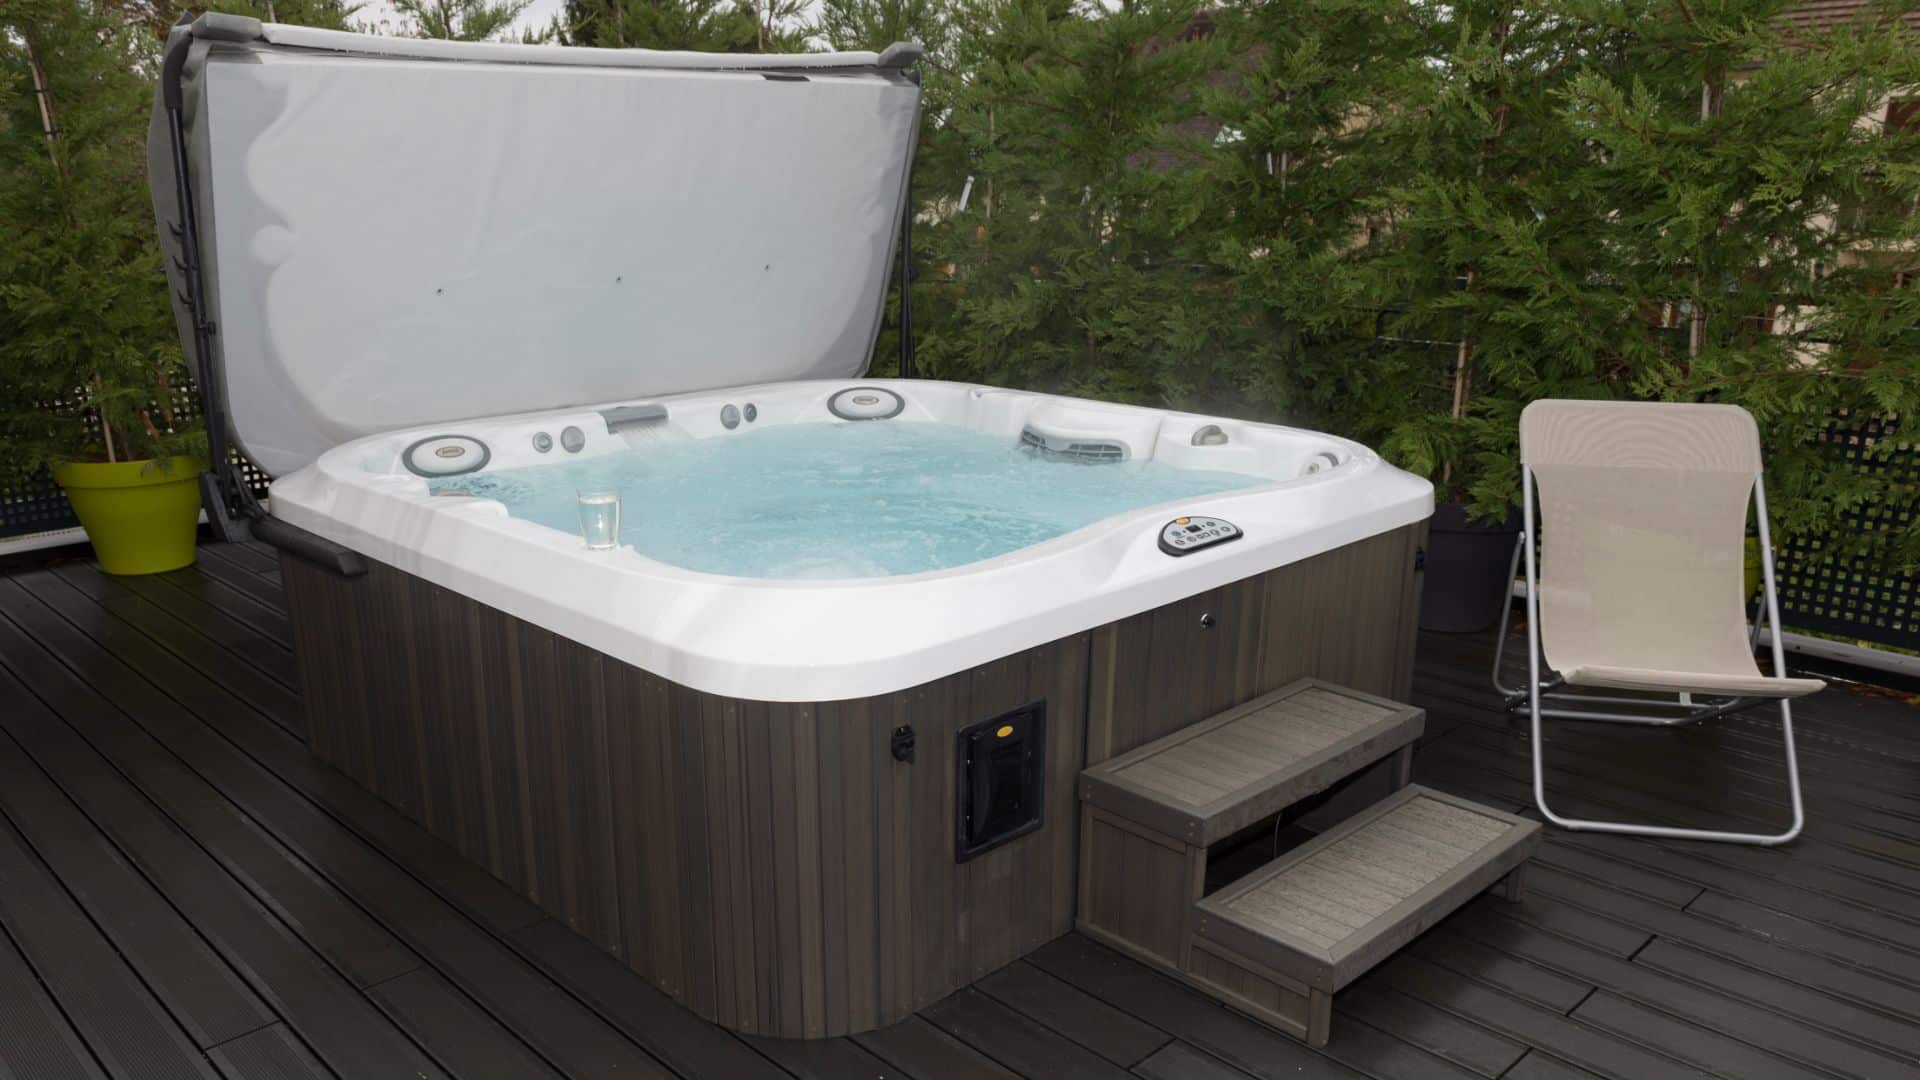 How Often Will I Actually Use My Jacuzzi Hot Tub?